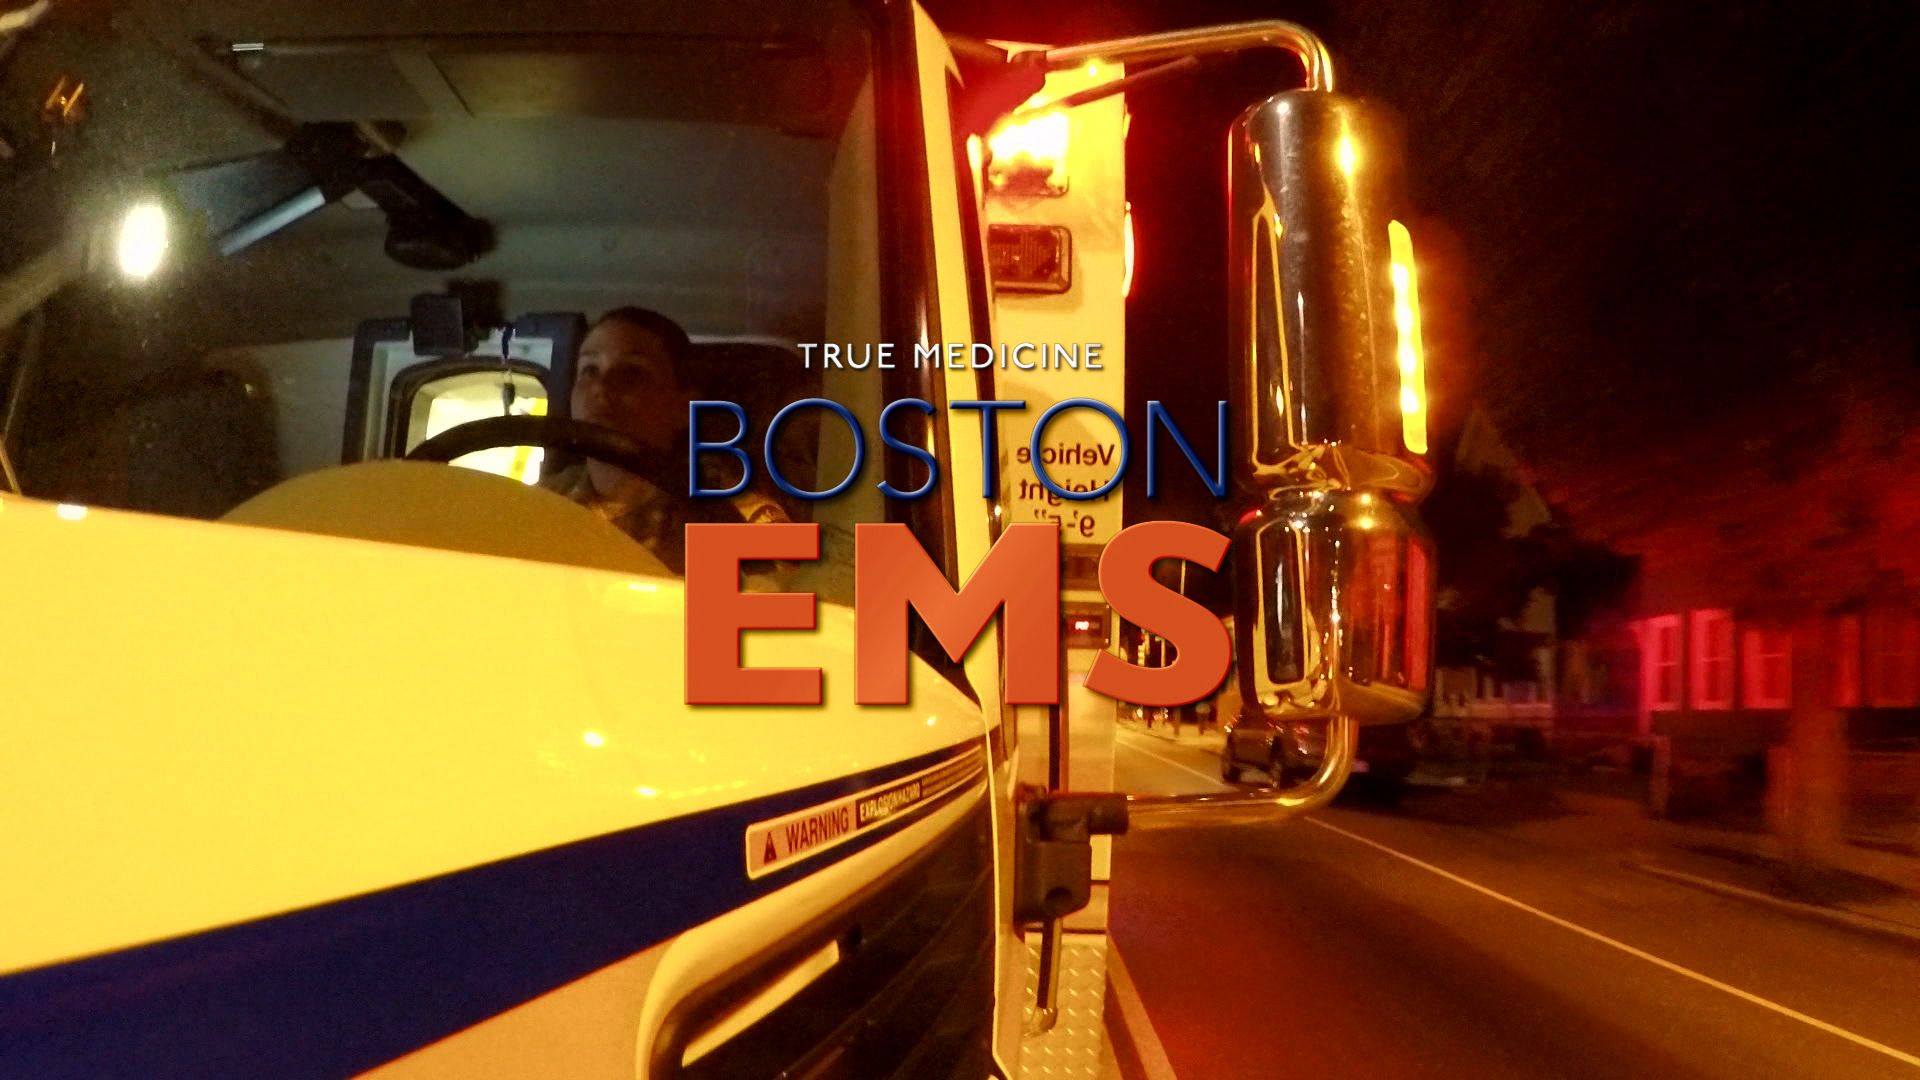 A.J.'s Review of Episode 1 of 'Boston EMS' Reality TV Series on ABC